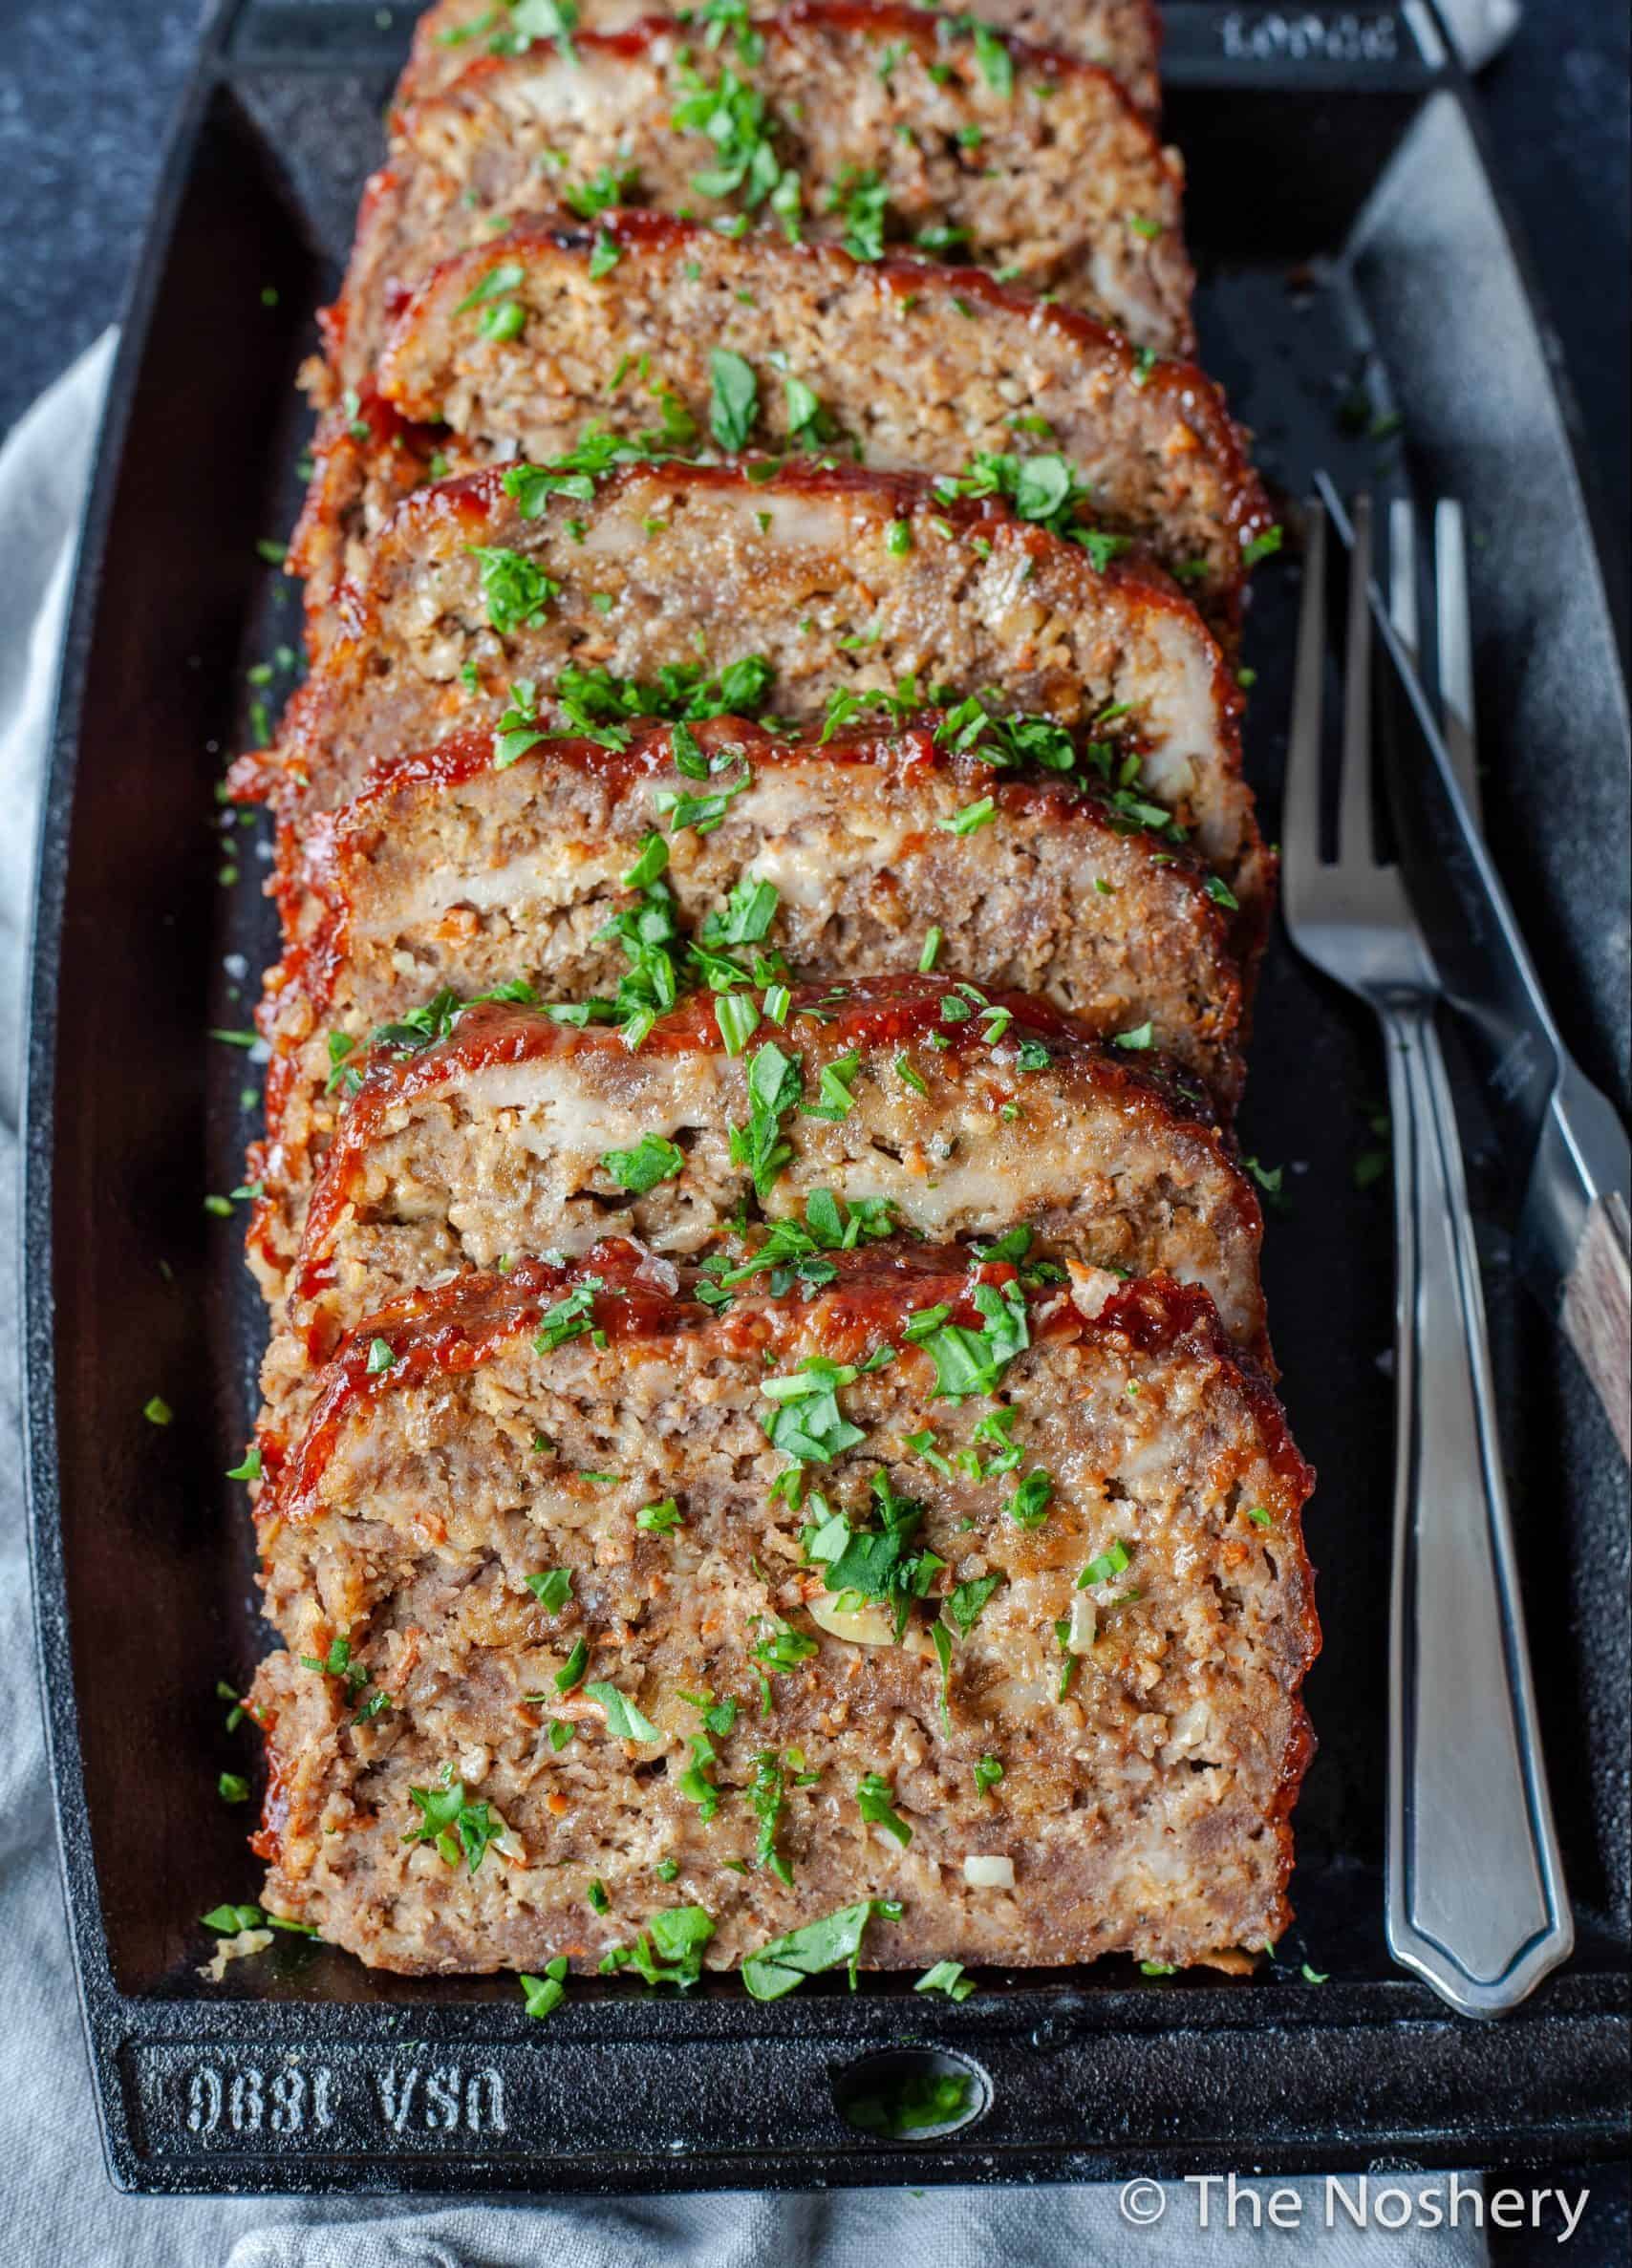 2-Piece Aluminum Meatloaf Pan with Insert